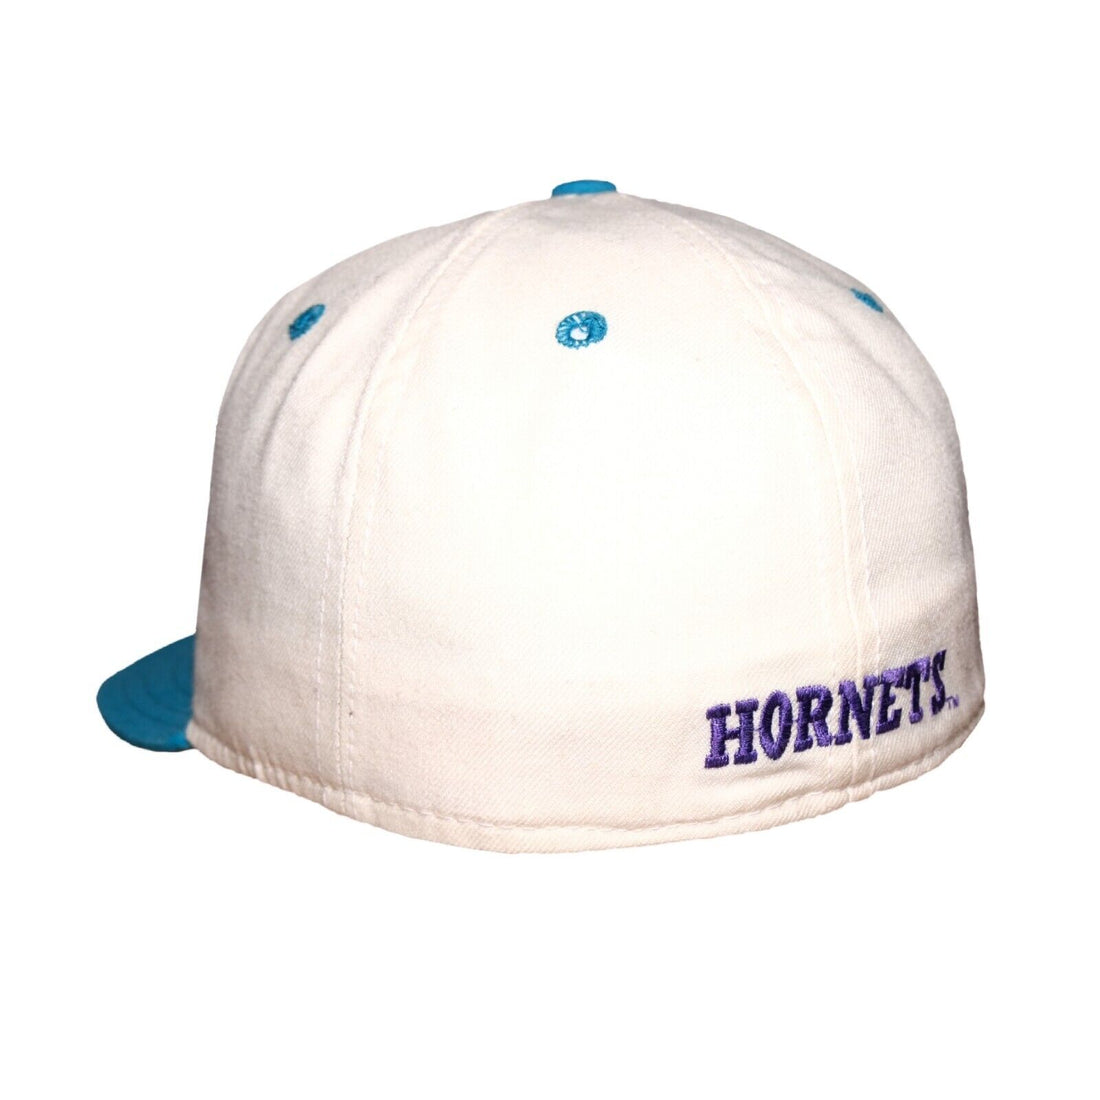 Vintage Charlotte Hornets Wool New Era Fitted Hat Size 7 1/4 90s NBA